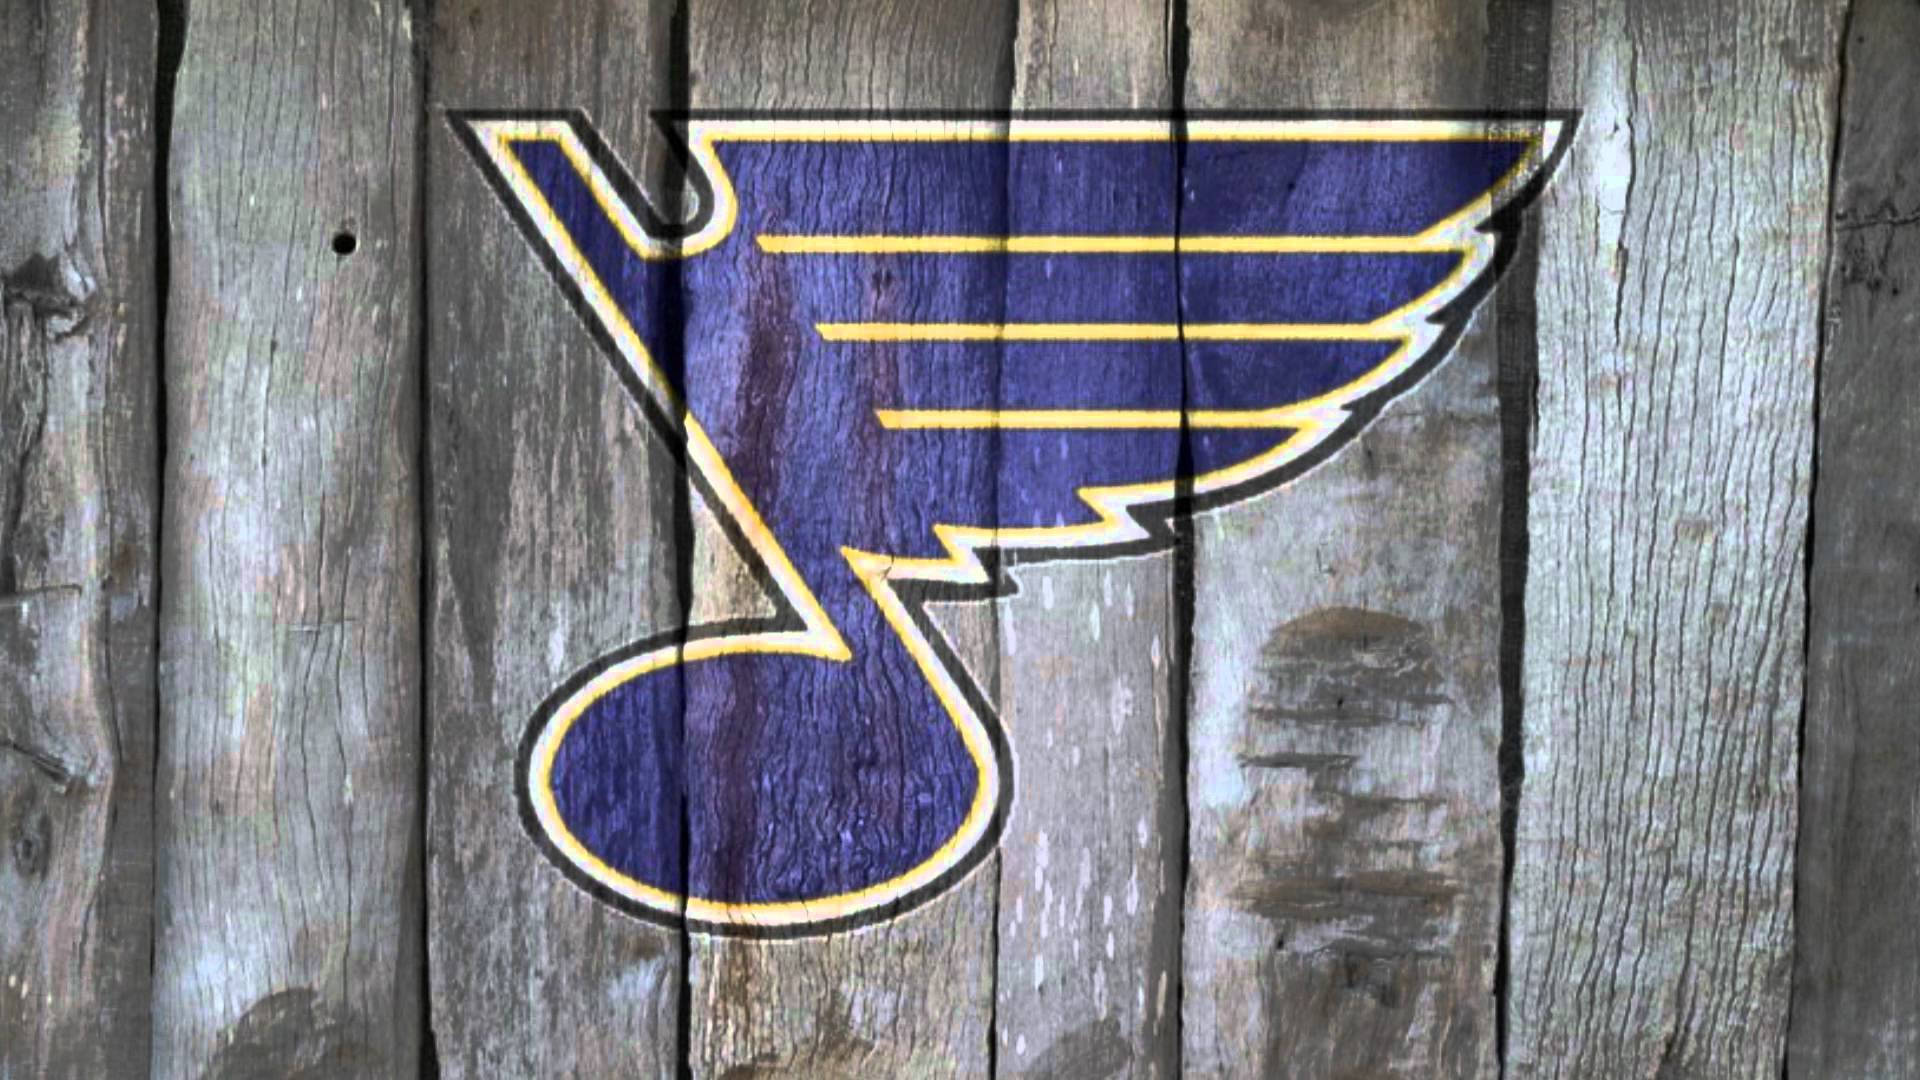 St. Louis Blues 2019 Stanley Cup Poster by Bob Wood